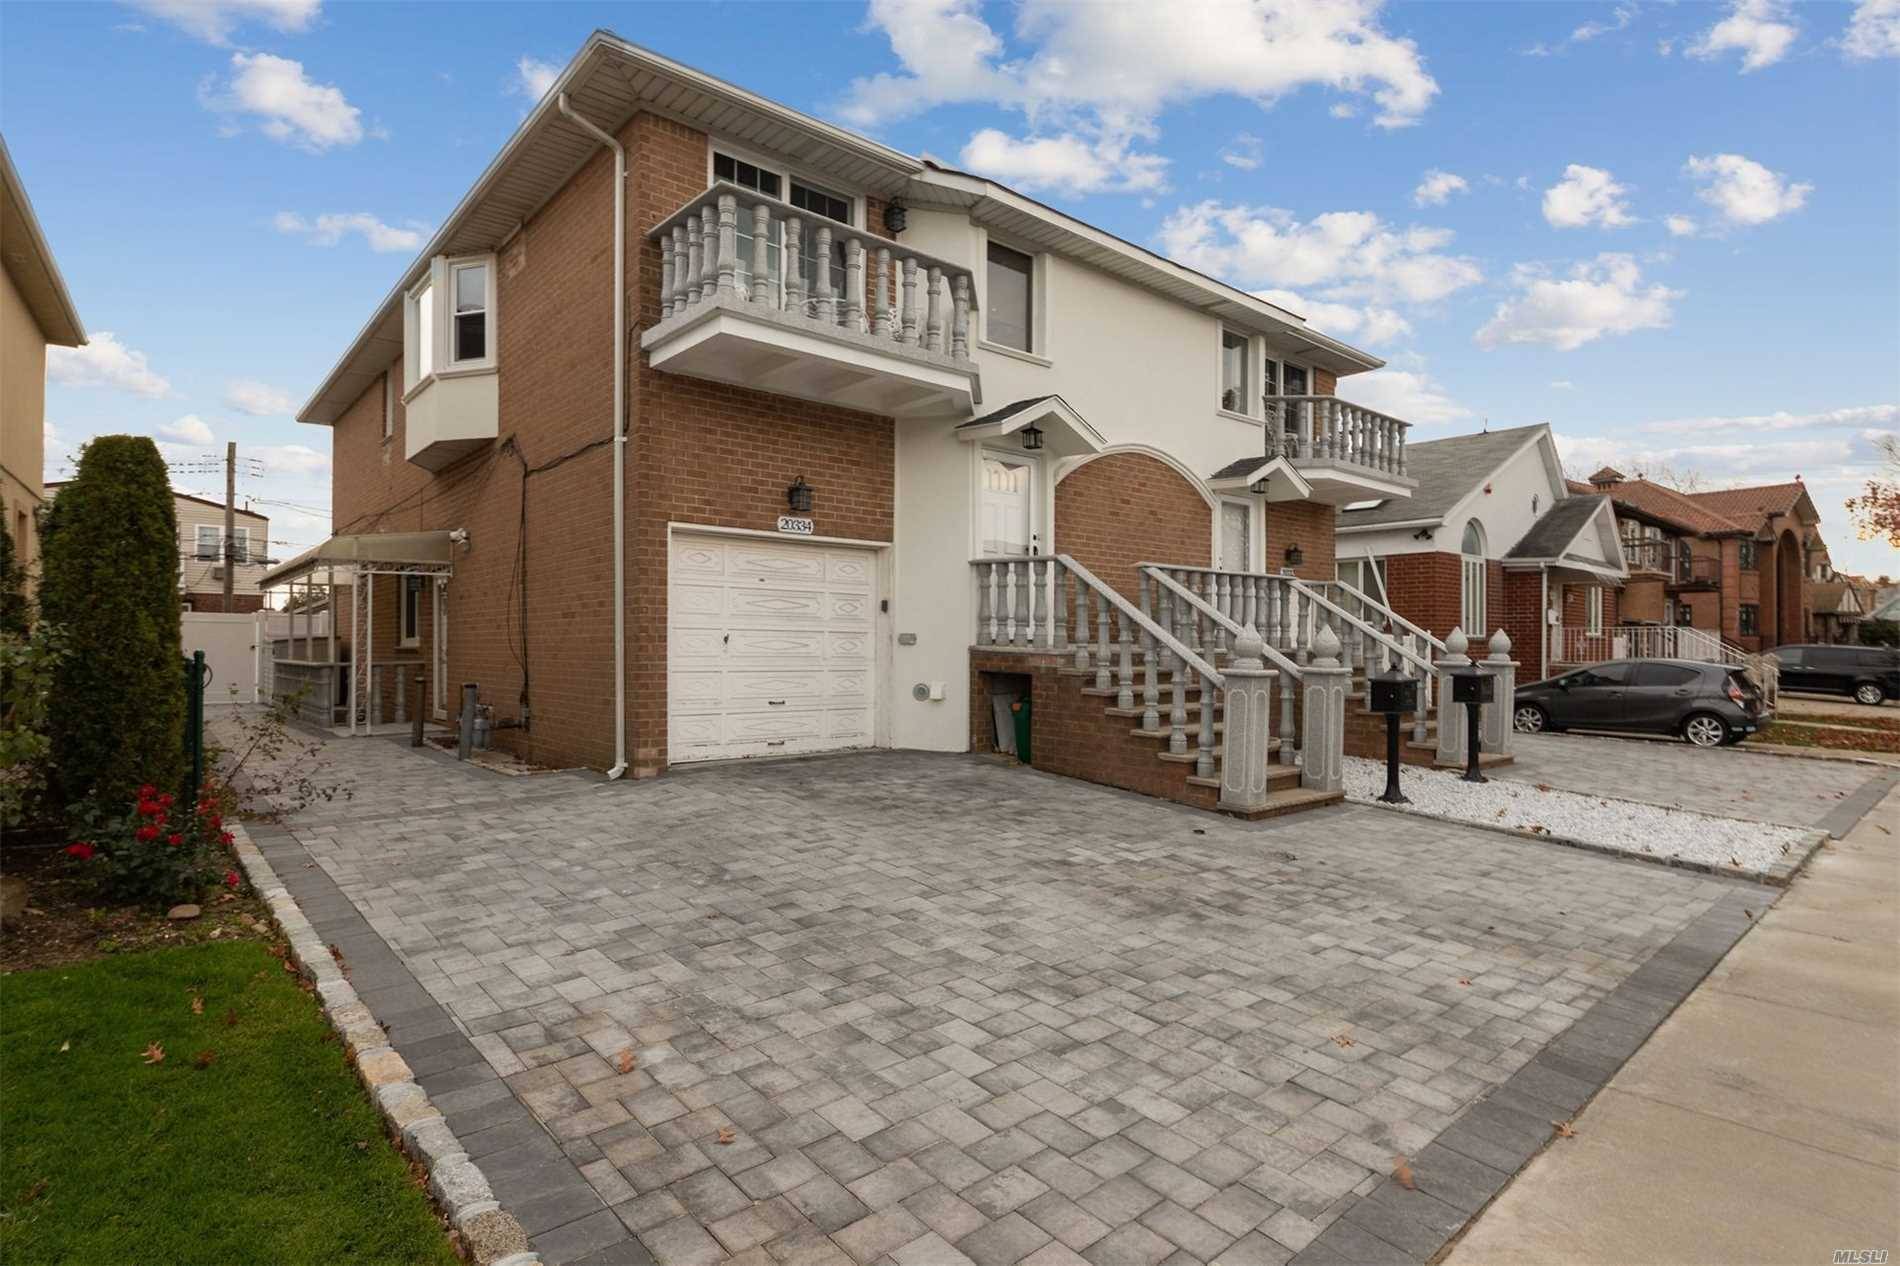 Bay Terrace Prime 27 Ave Split Level 2 Family Triplex Unit With Cathedral And Vaulted Ceilings Duplex Unit With Large Rooms 6 Bedrooms, 2.